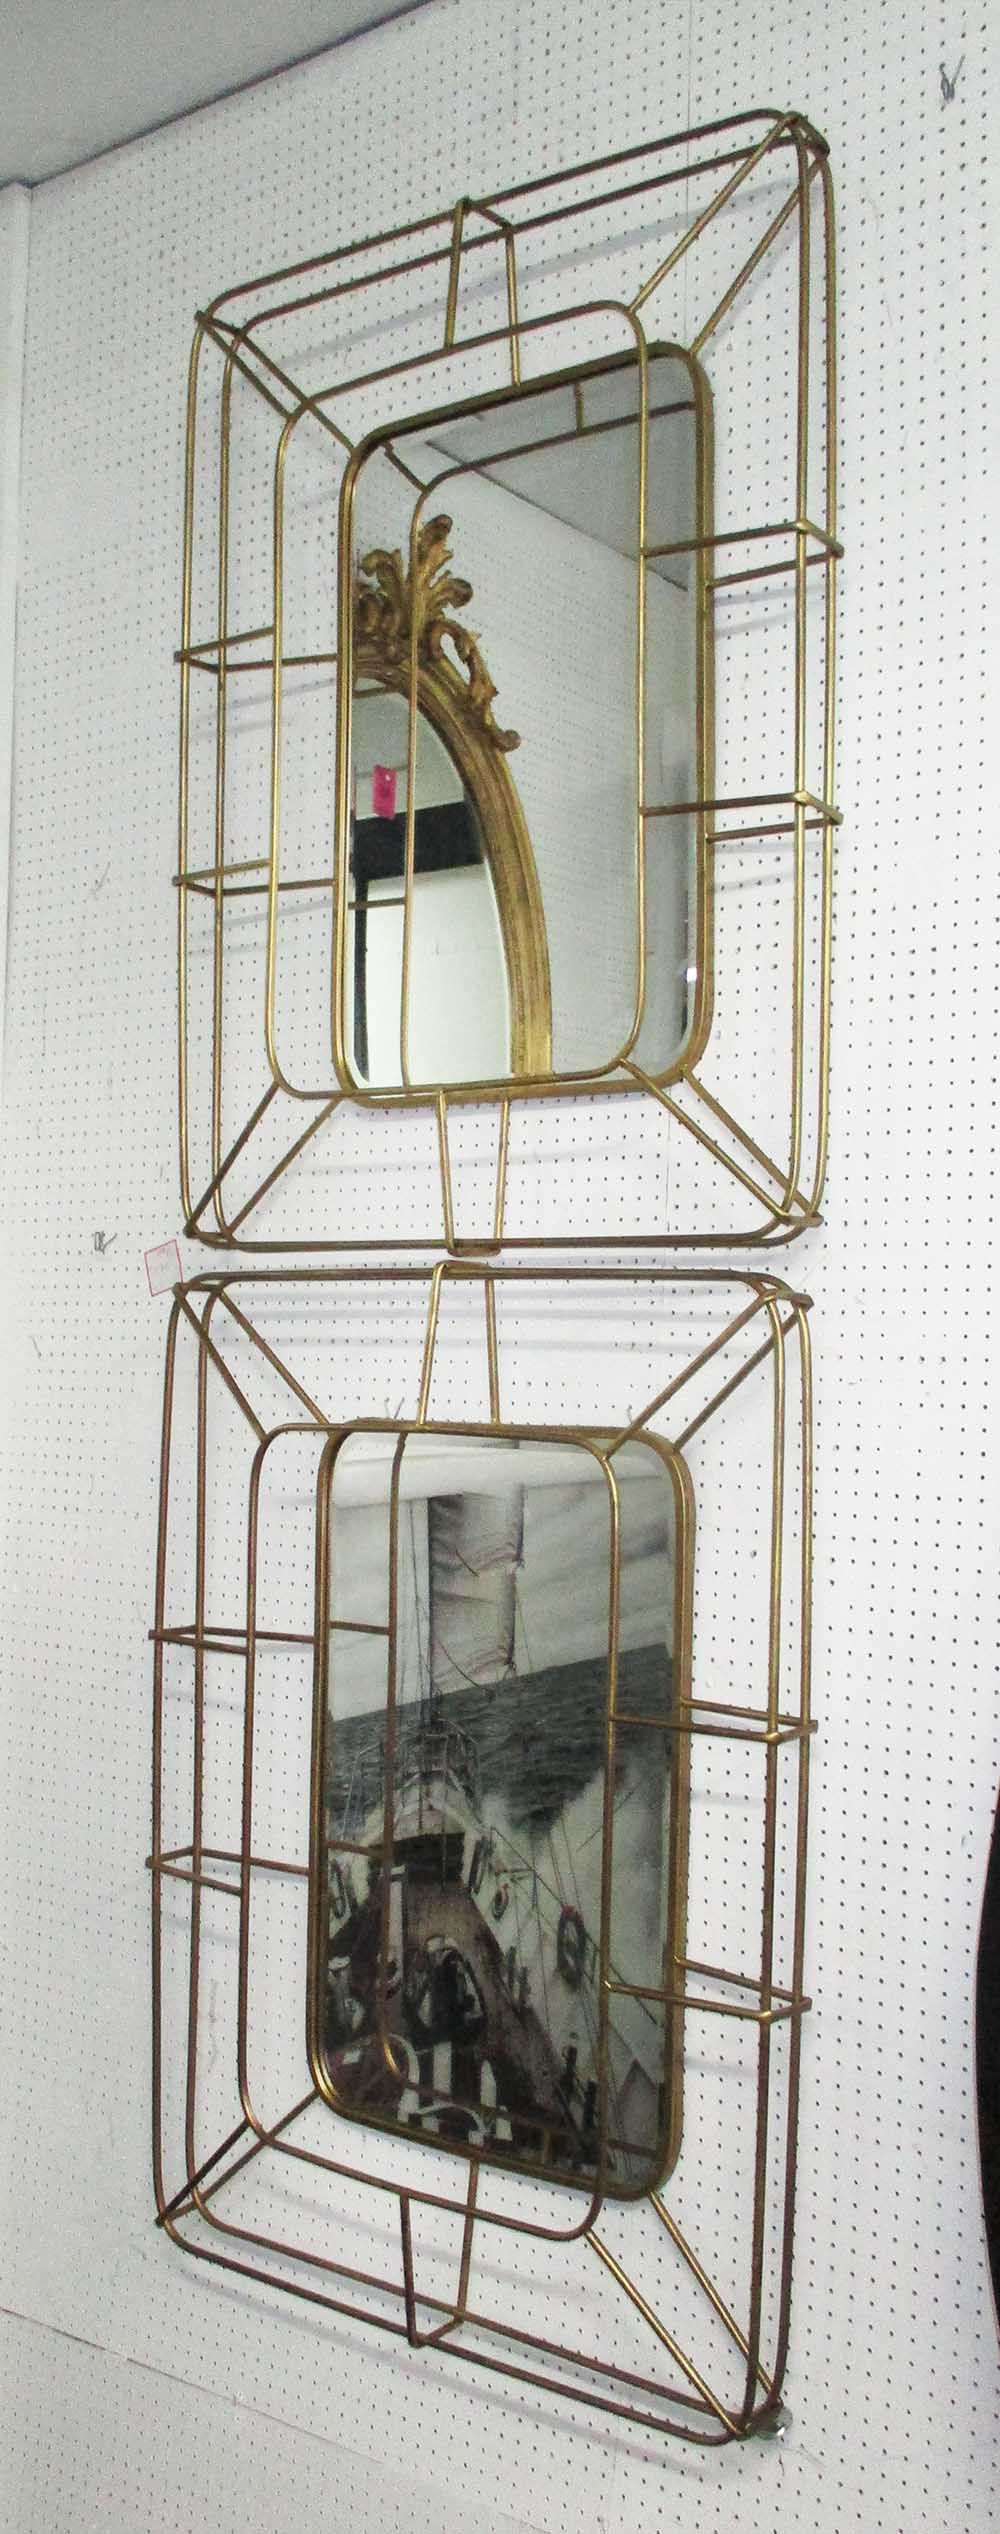 MIRRORS, a pair, bevelled glass on a gilded metal tubular frame.